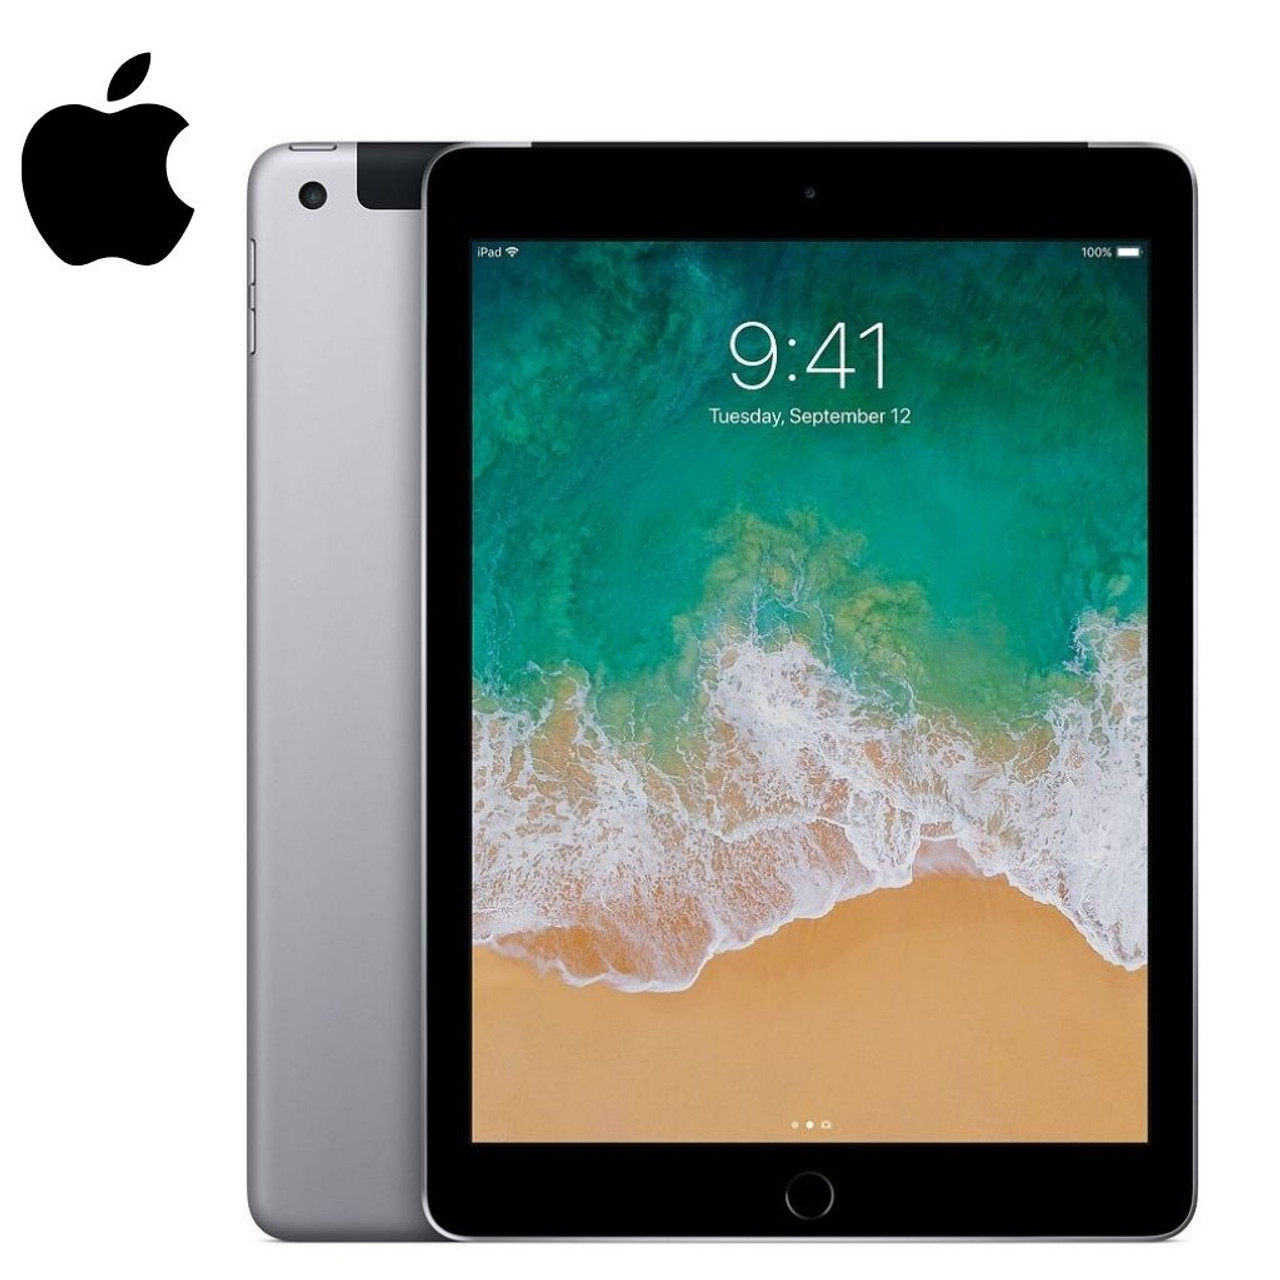 Apple® iPad (5th Gen) 128GB Bundle with Case, Charger & Screen Protector product image